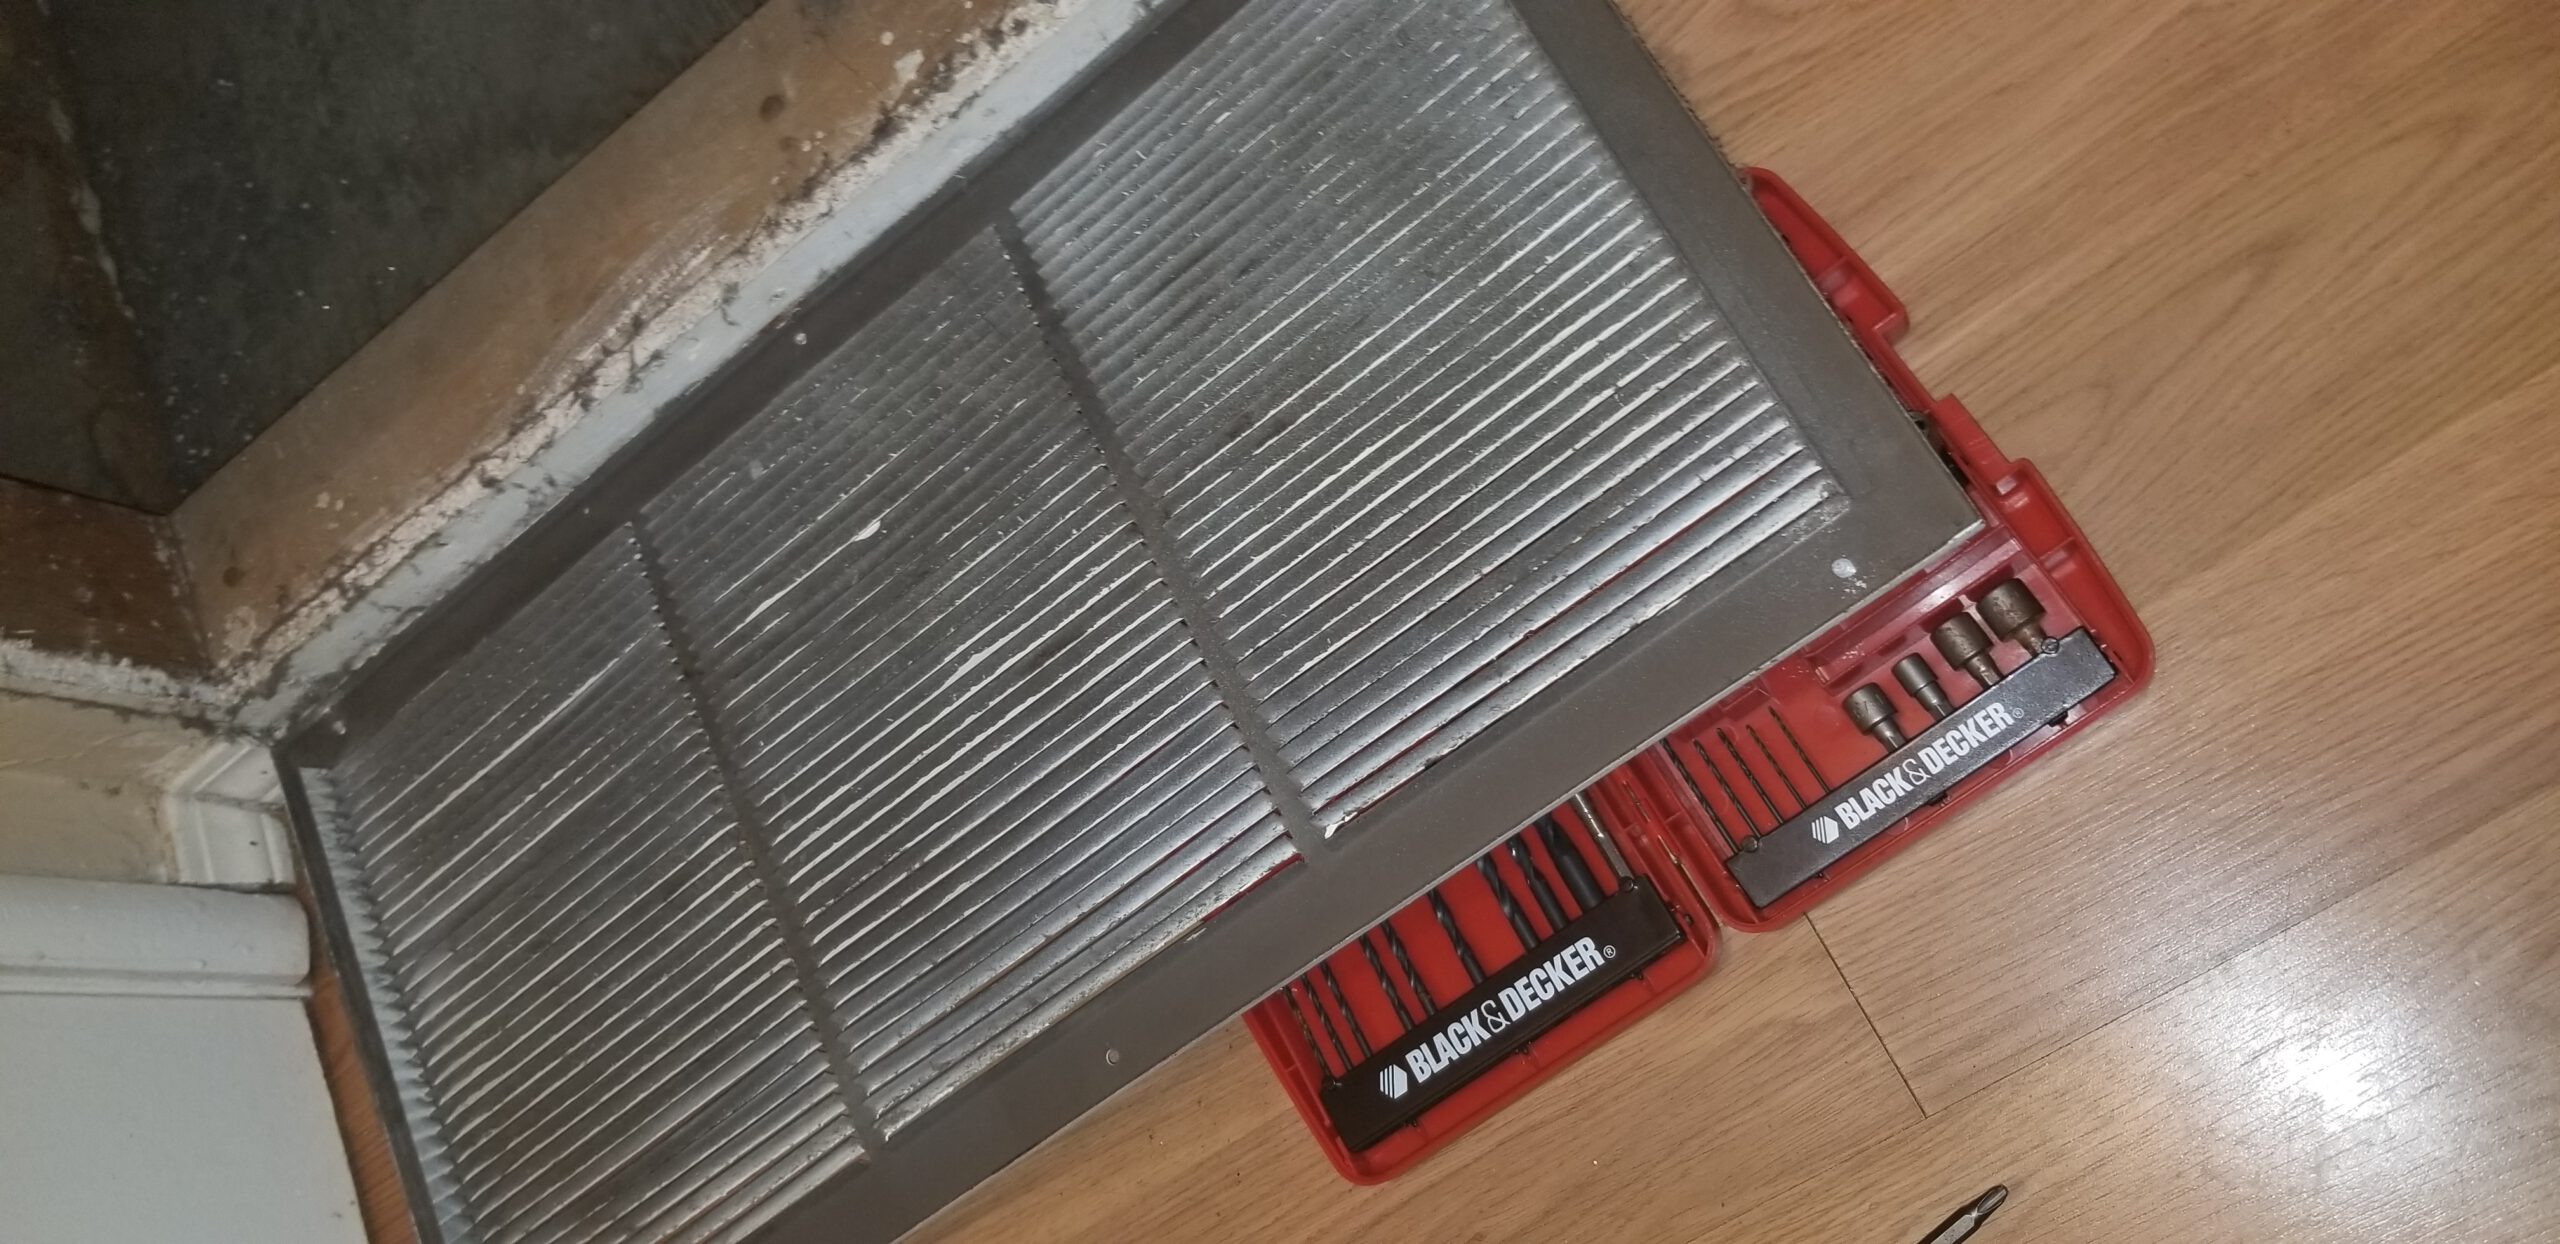 How to Choose The Right Tools and Equipment for Air Duct Cleaning at Home